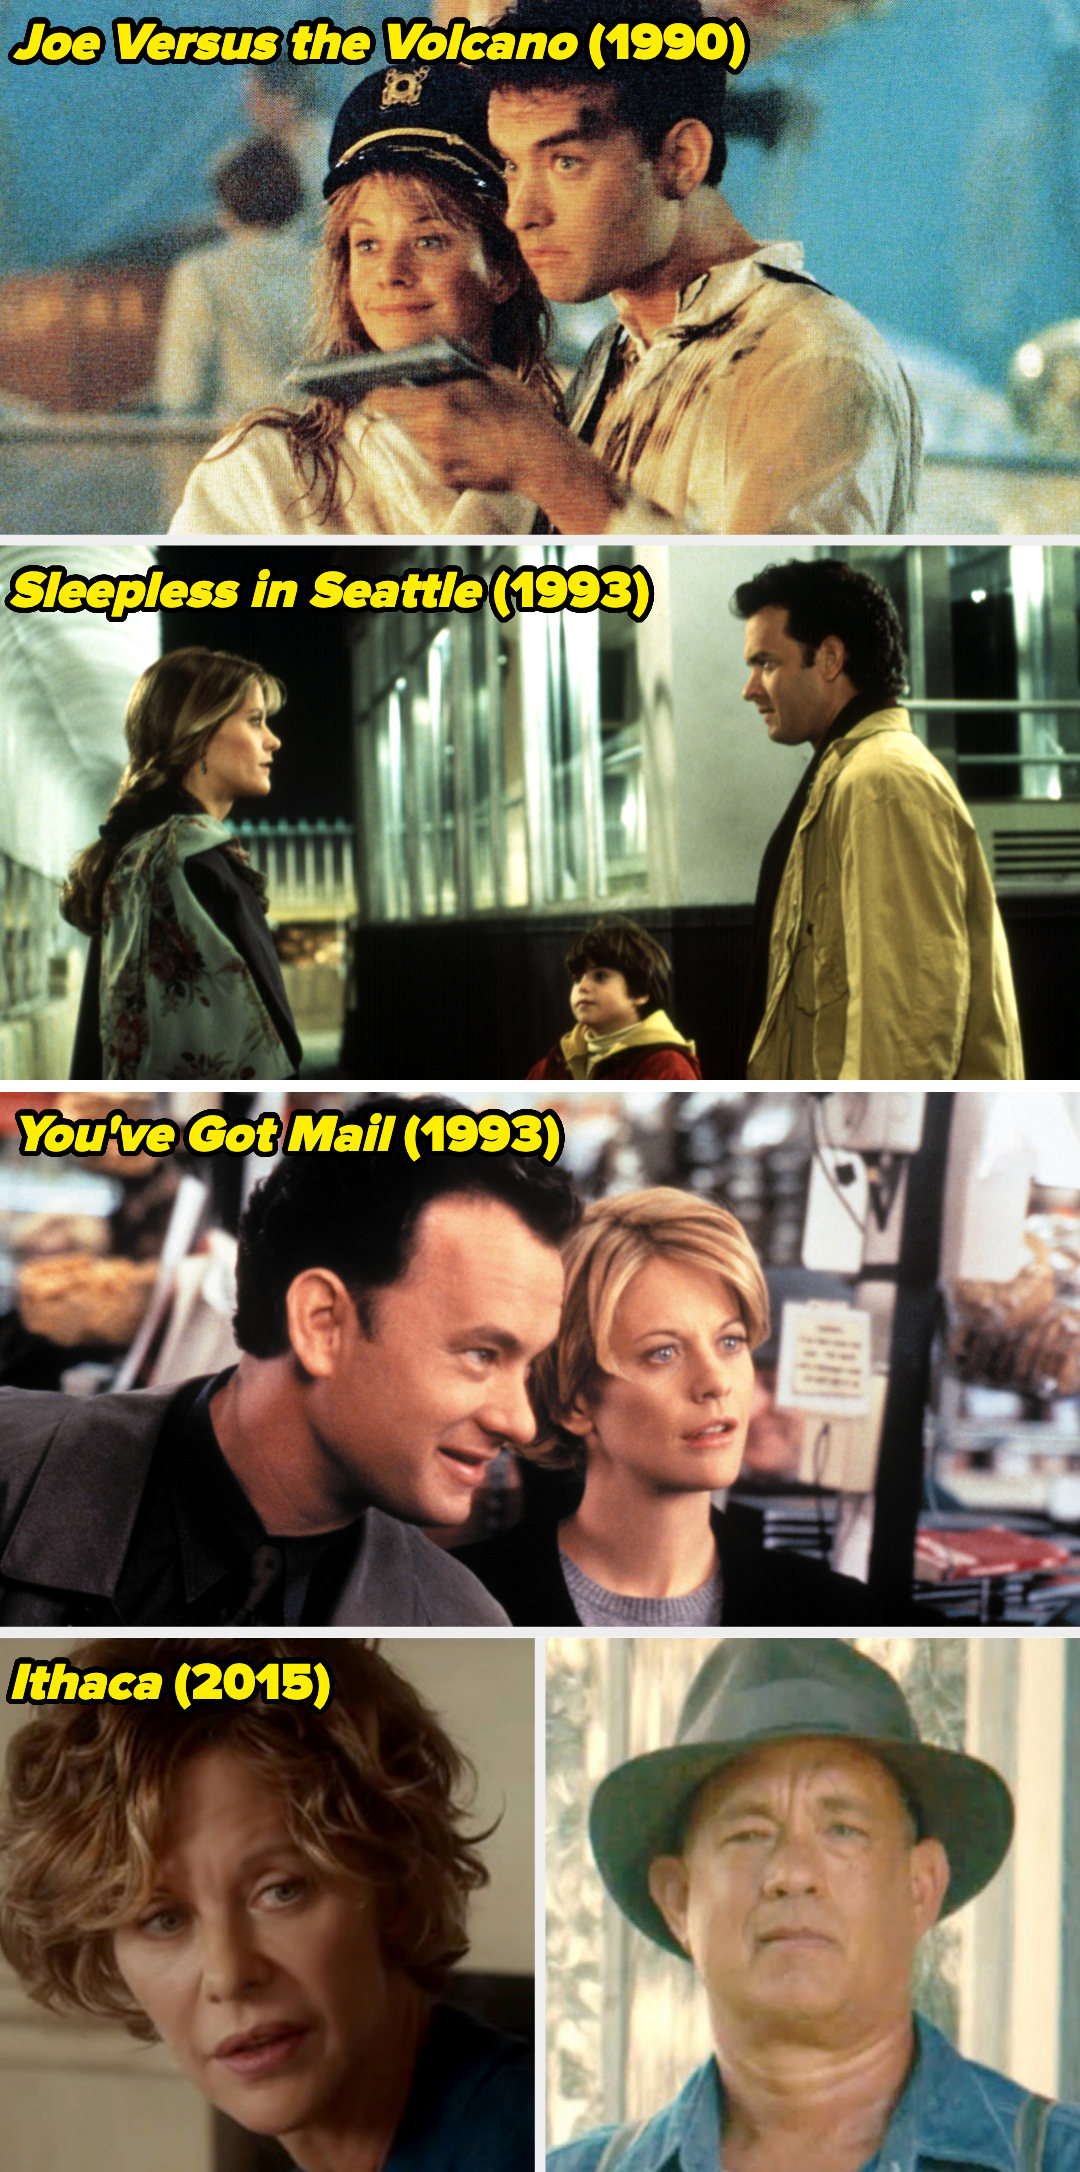 Meg Ryan and Tom Hanks in scenes from &quot;Joe Versus the Volcano,&quot; &quot;Sleepless in Seattle,&quot; and &quot;You&#x27;ve Got Mail,&quot; and from &quot;Ithaca&quot; (only Meg Ryan in this film)